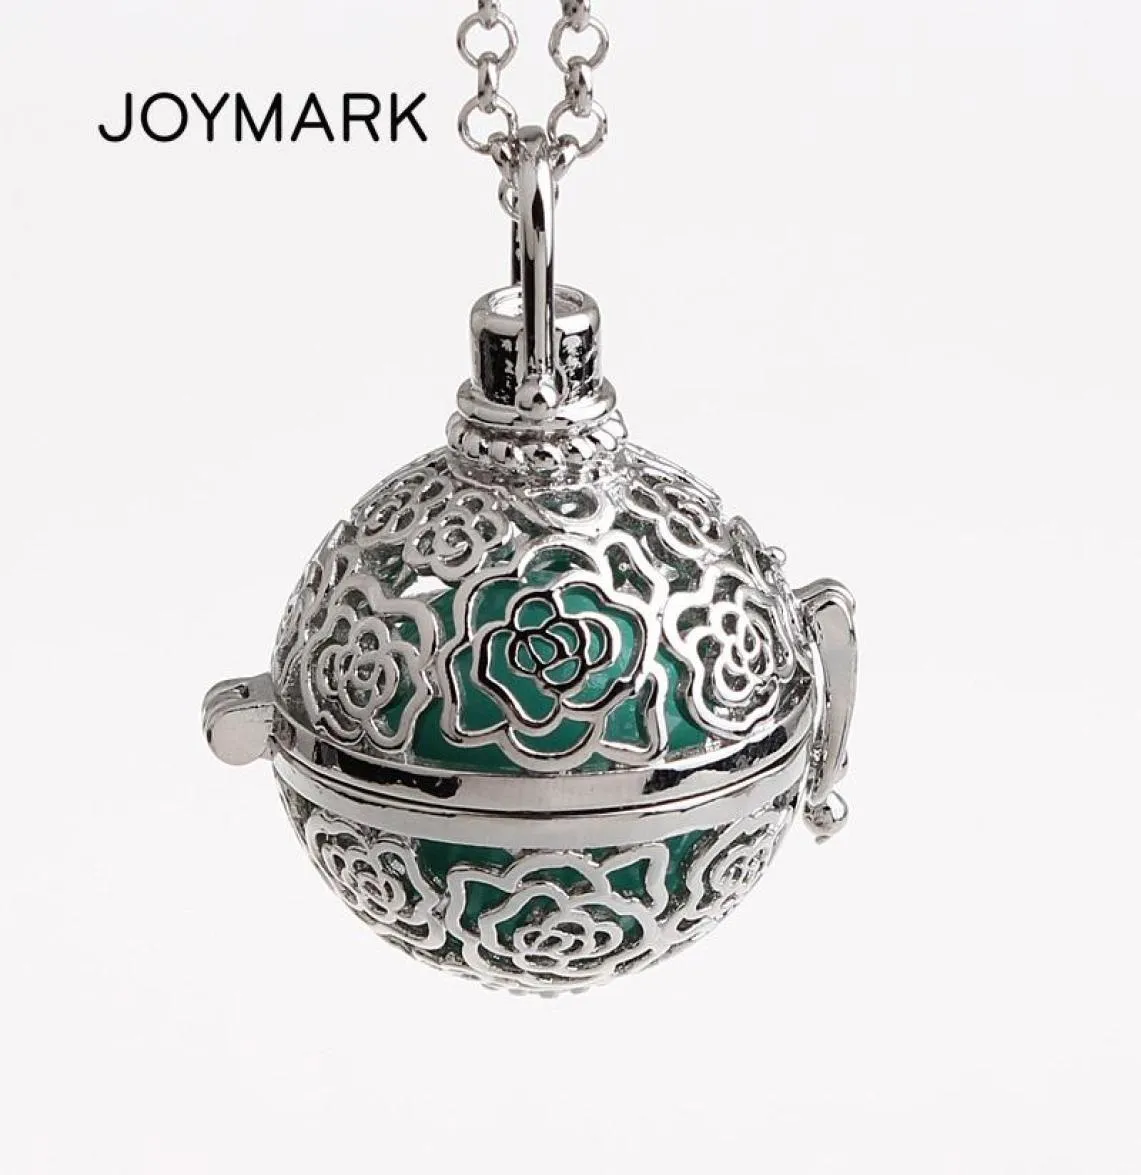 JOYMARK 5pcslot Rose Flower Hollow Cage Mexican Chime Magic Box Music Sound Bell Ball Pendant Women Pregnancy Necklaces HCPN533871455